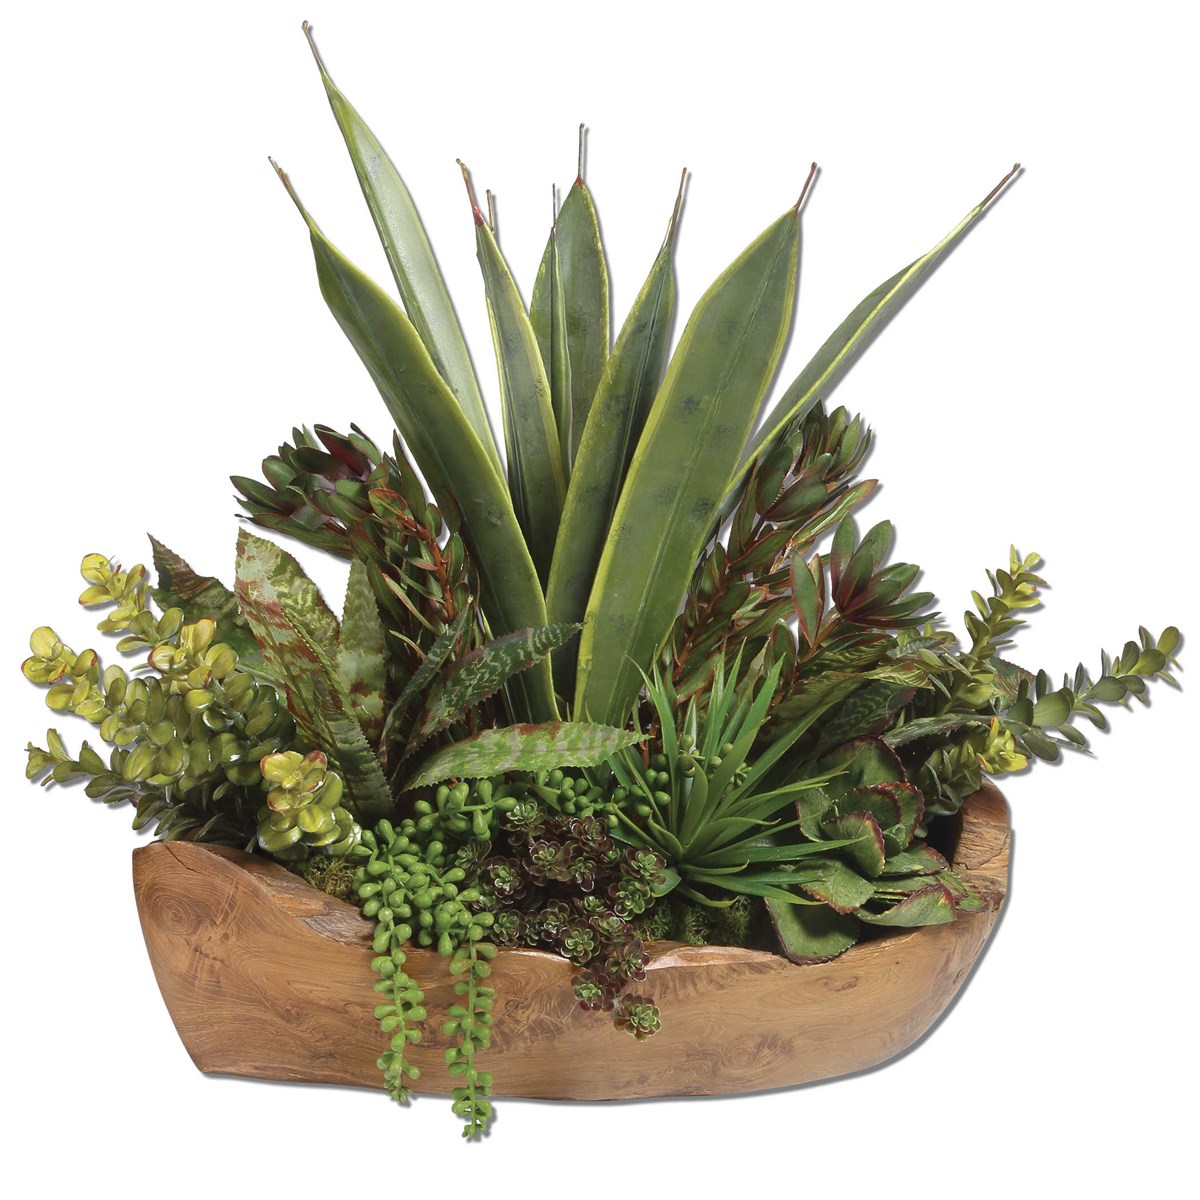 Dense and lush mix of succulent plants including aloe, jade, bromeliad, string of pearls and others in a hand carved, natural teak bowl. Dimensions: 22 W X 20 H X 12 D (in) Weight: 13